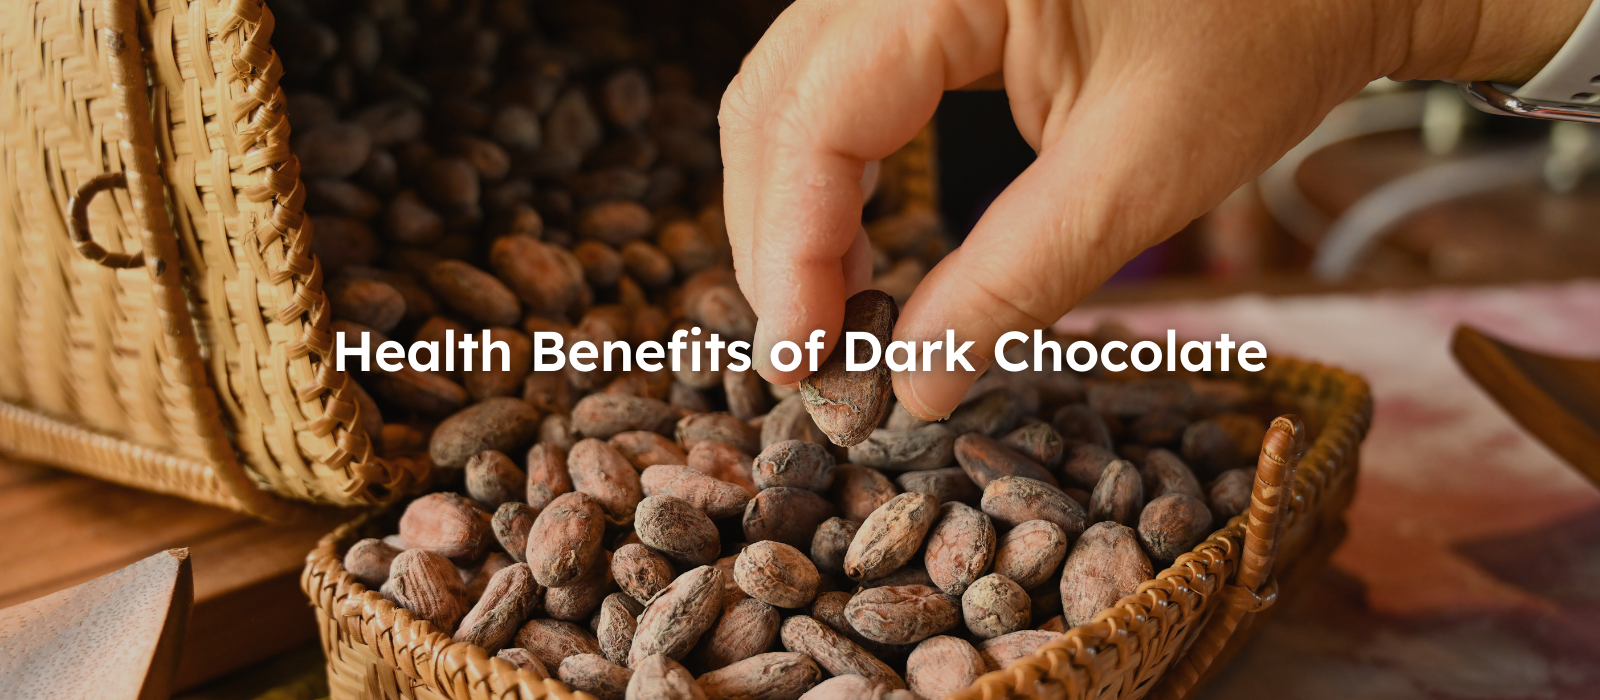 5 Reasons Why Dark Chocolate is Good For Your Mind, Body and Soul!